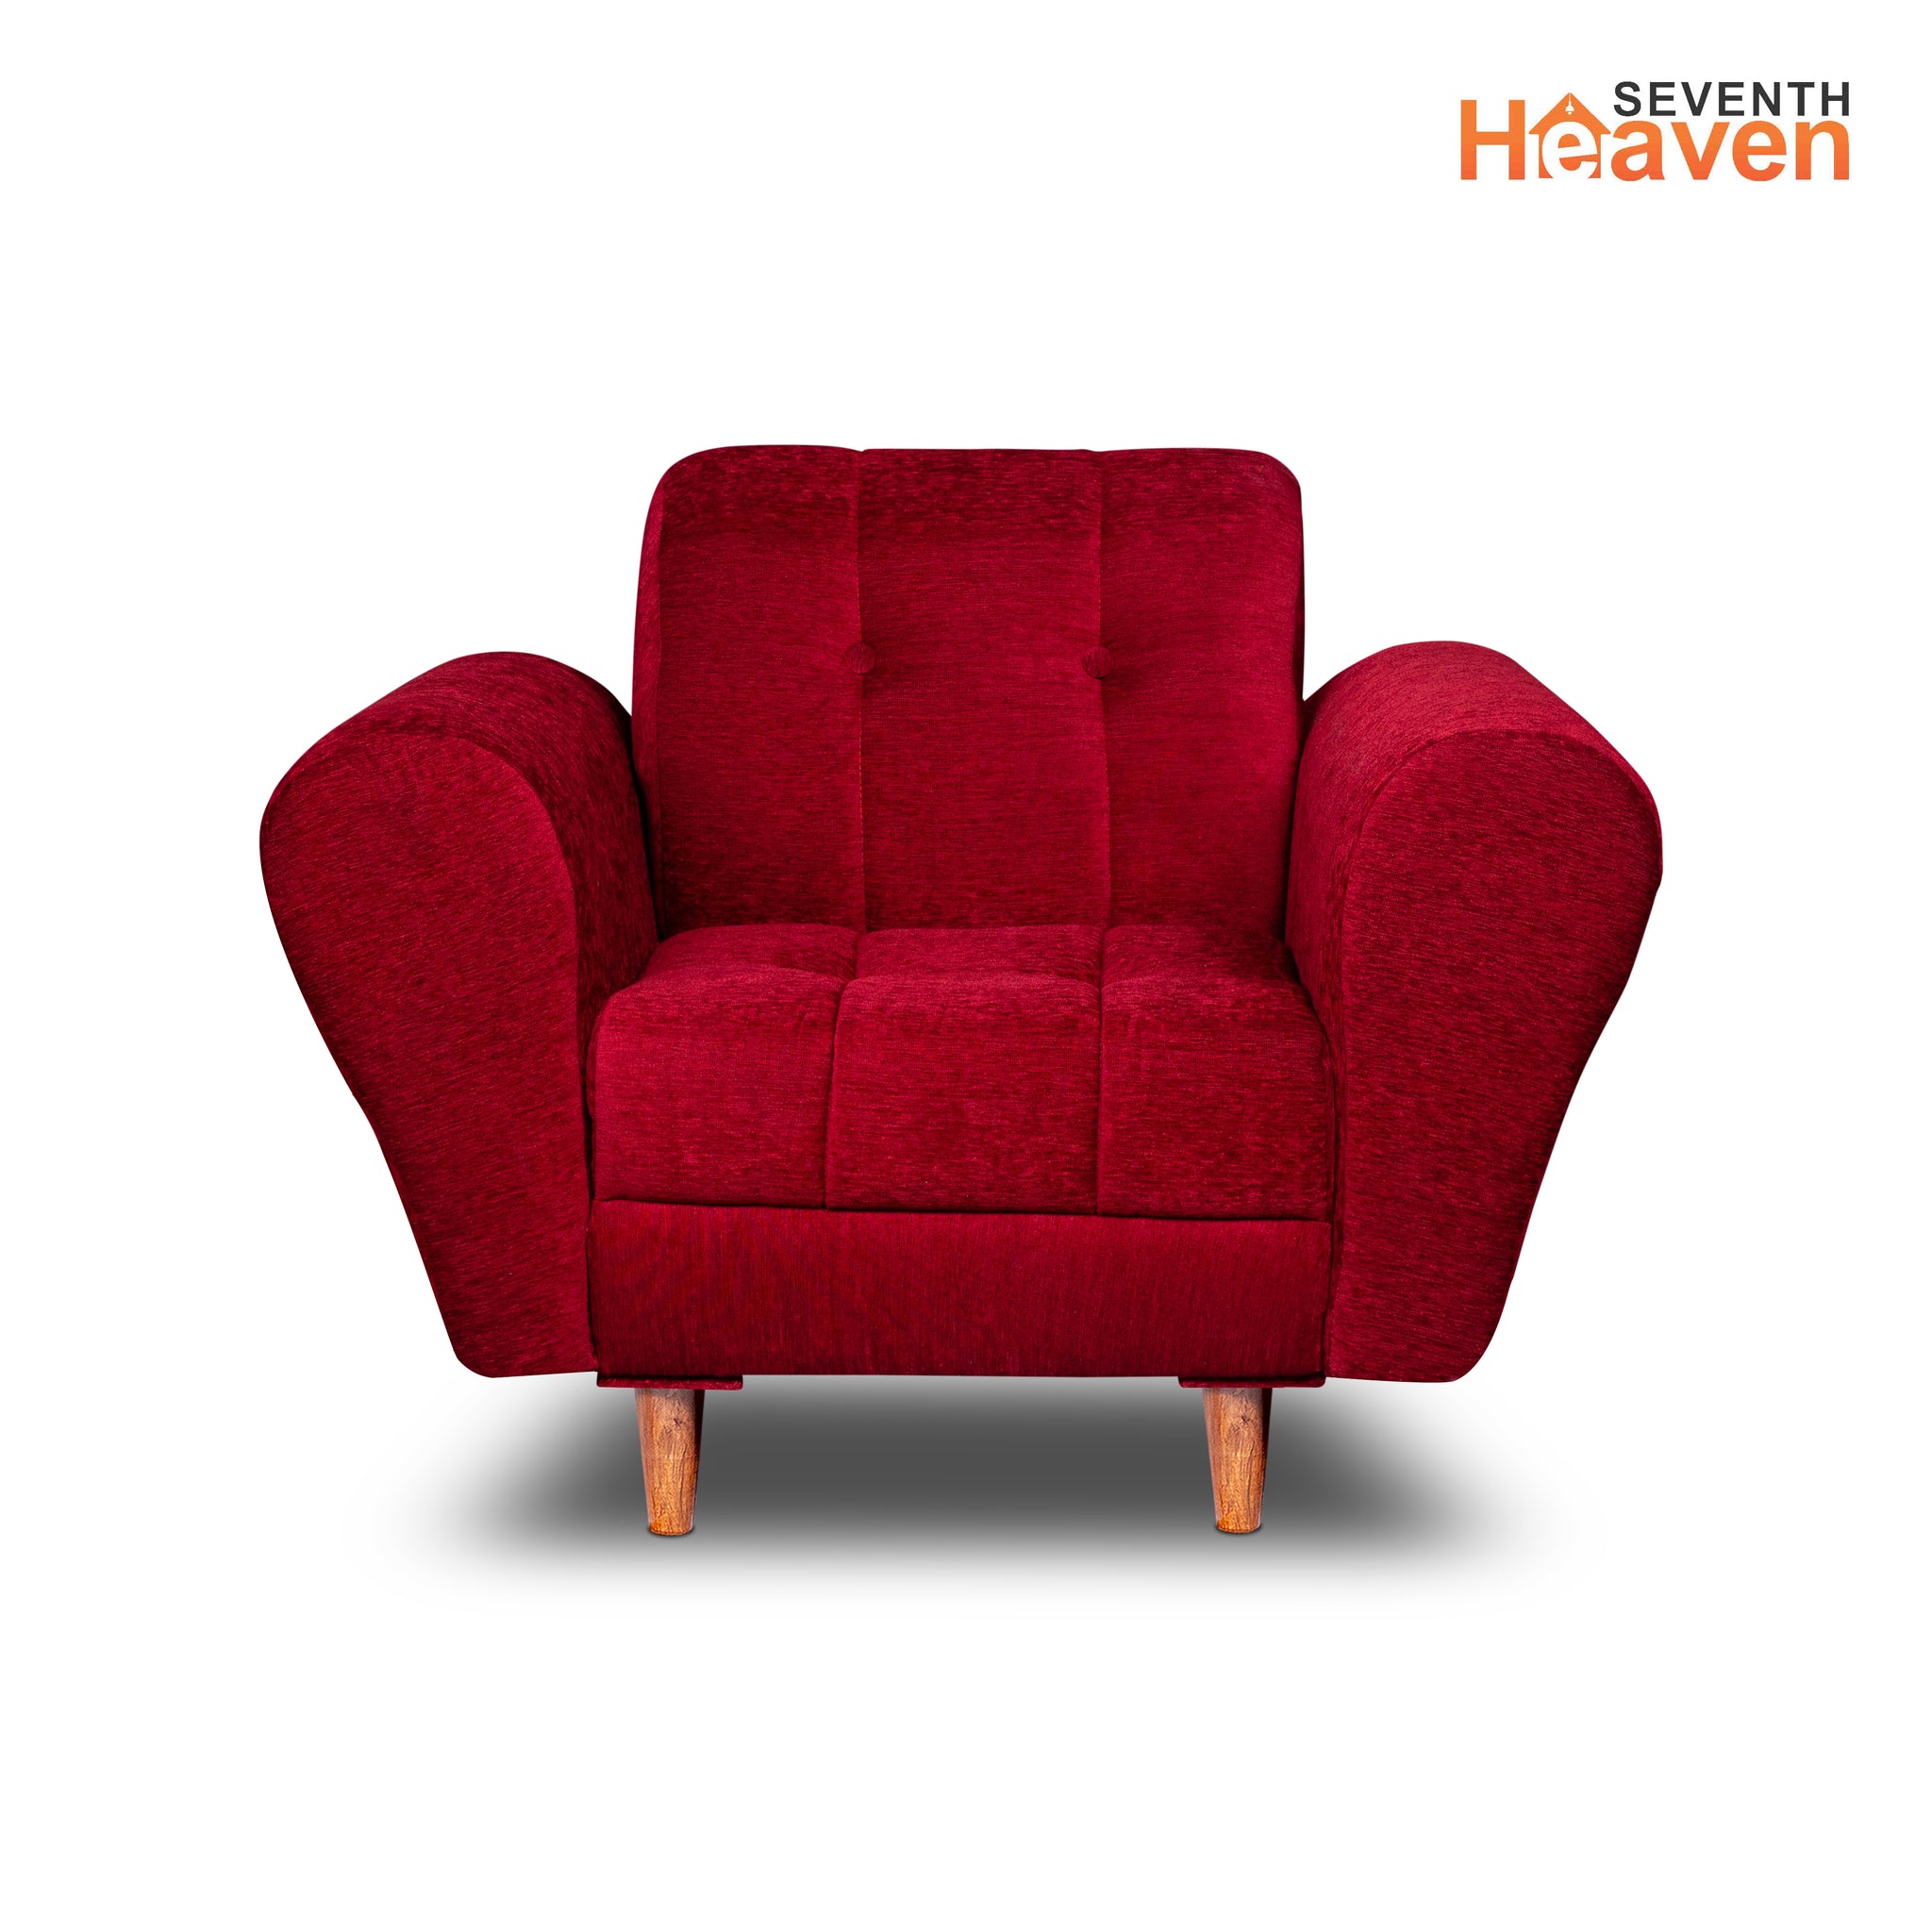 Seventh Heaven Milan 1 Seater Wooden Sofa Set Modern & Elegant Smart Furniture Range for luxurious homes, living rooms and offices. Maroon Colour Molphino fabric with sheesham polished wooden legs.